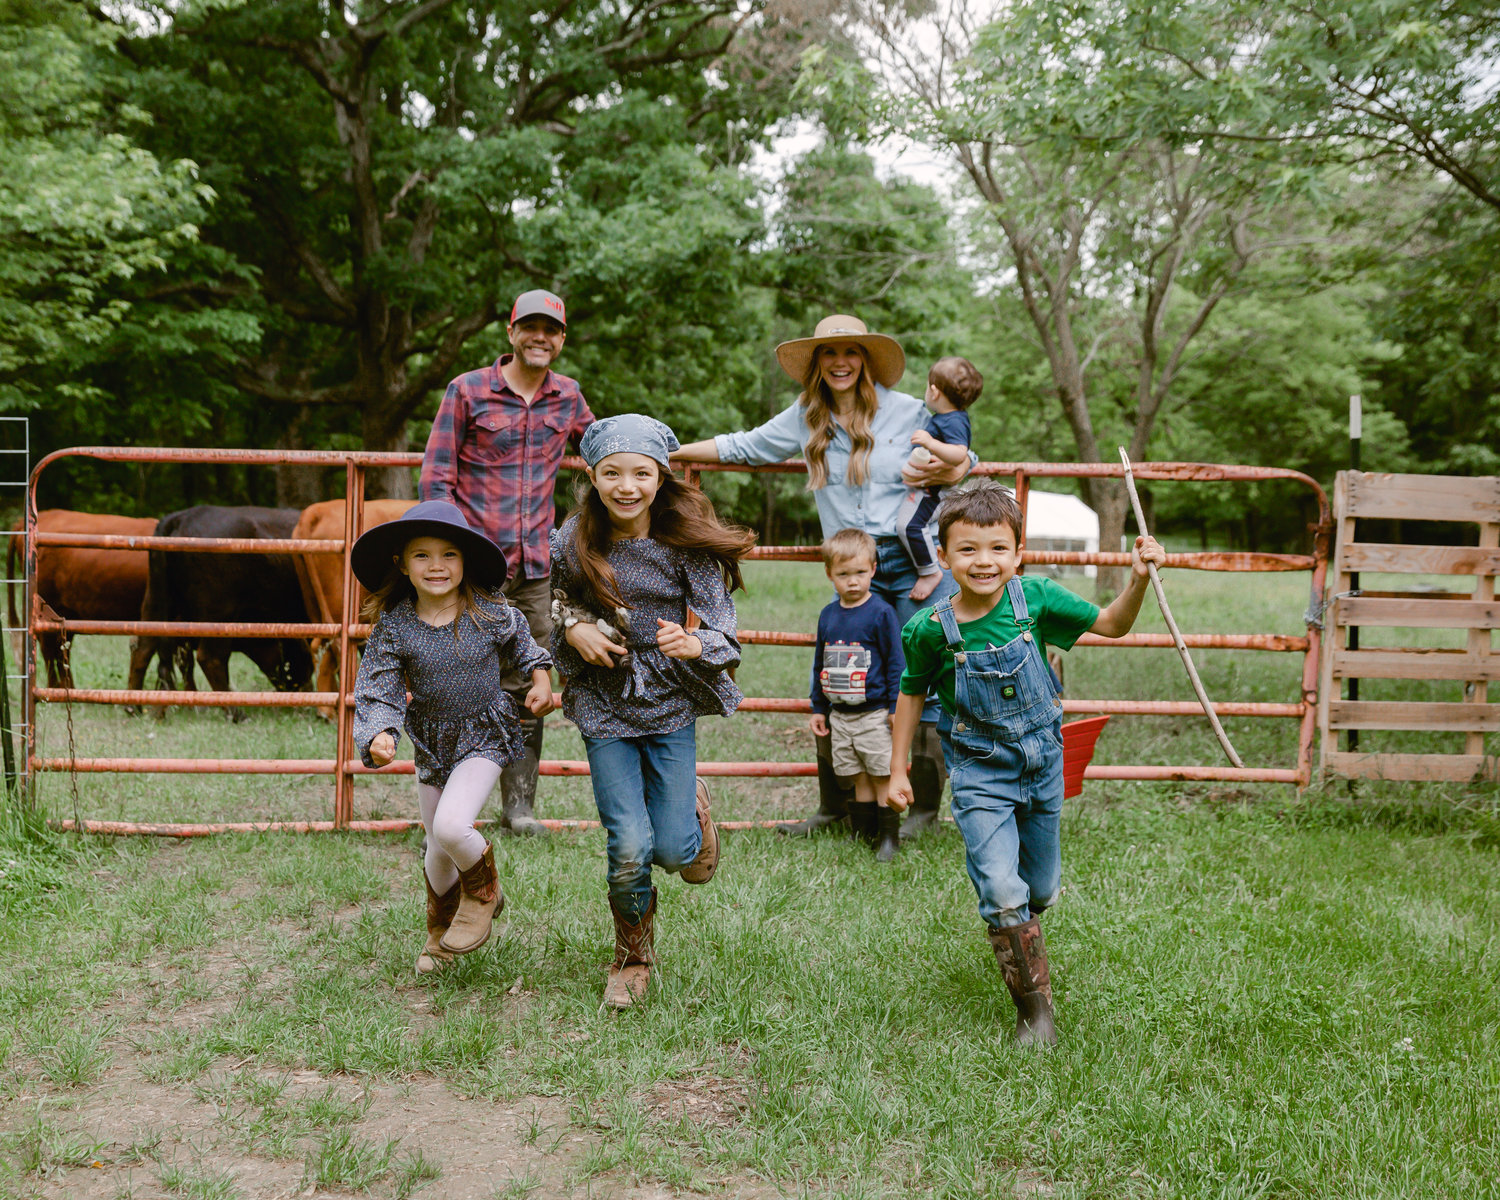 The Big Family not only tends to pumpkins, but also Dexter cows, chickens and hogs. The Soldinie family are finding that farming is more than a job, it is a way of life, a happy life at that.